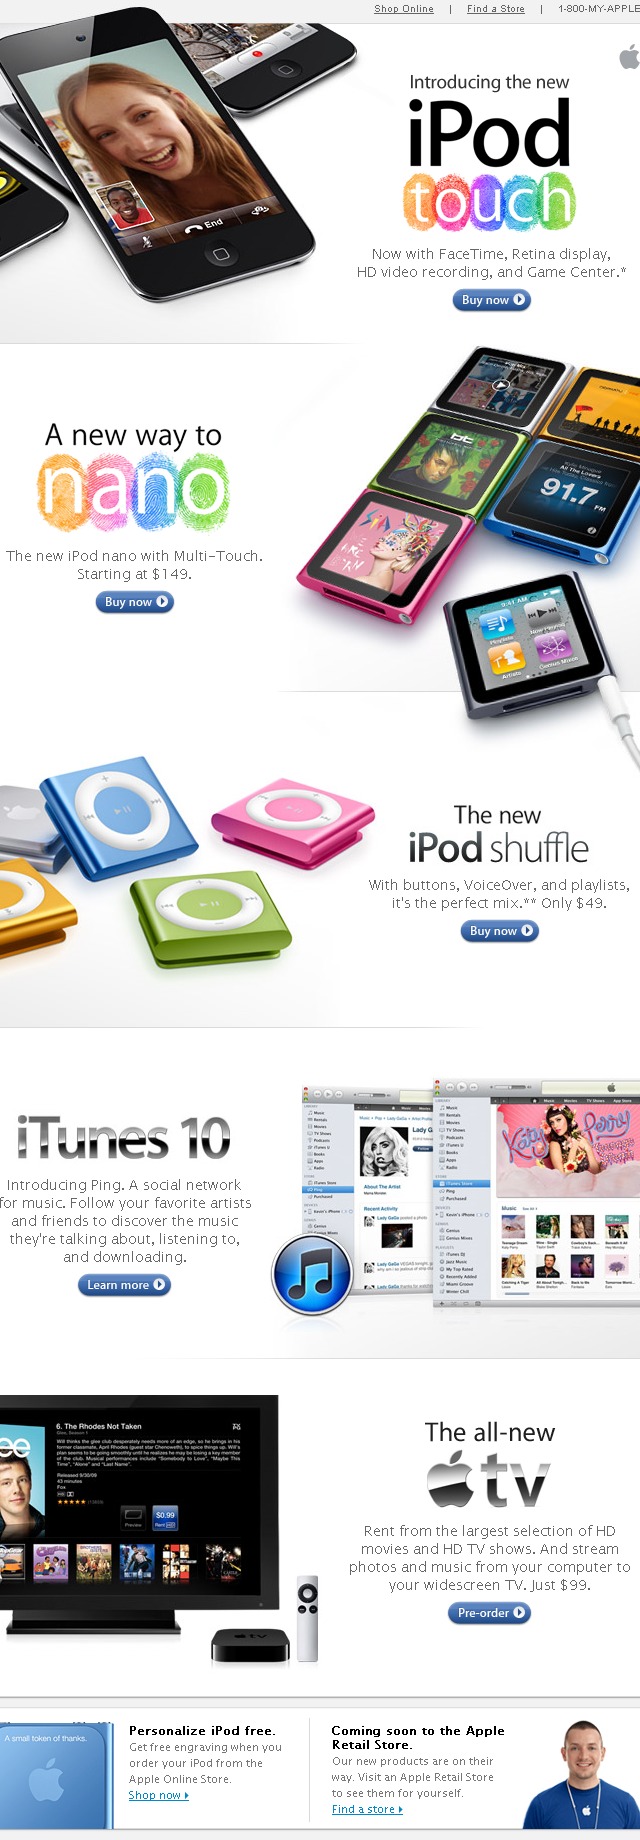 email Apple new iPods iTunes 10 TV